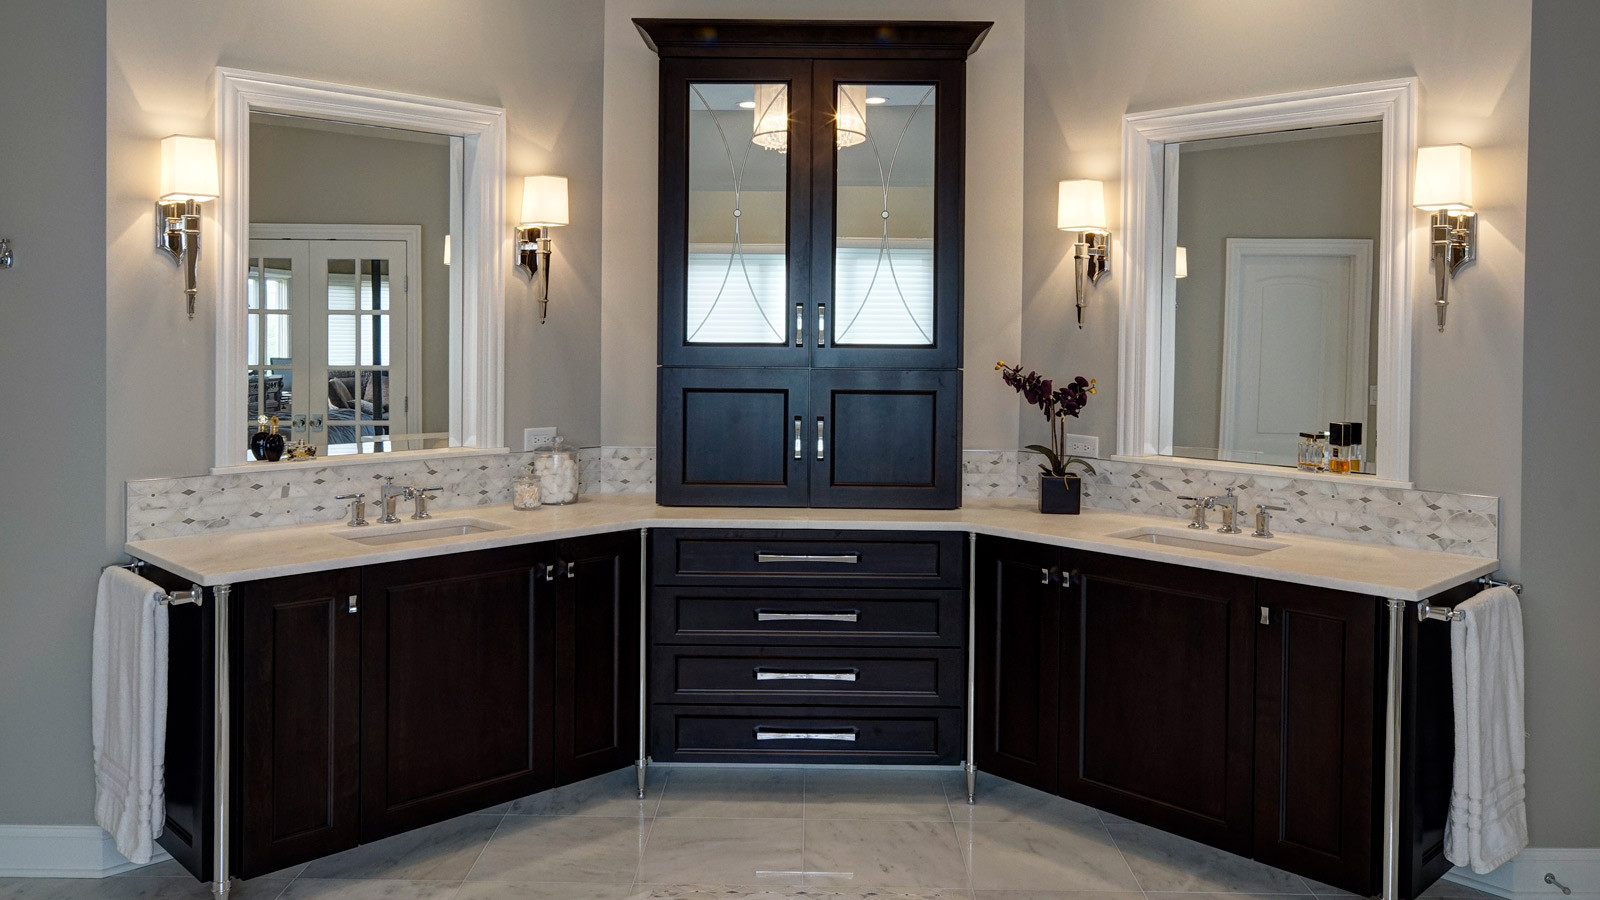 Bathroom Remodeling Naperville Il
 Stylish Oasis Bathroom Design Naperville IL Drury Design